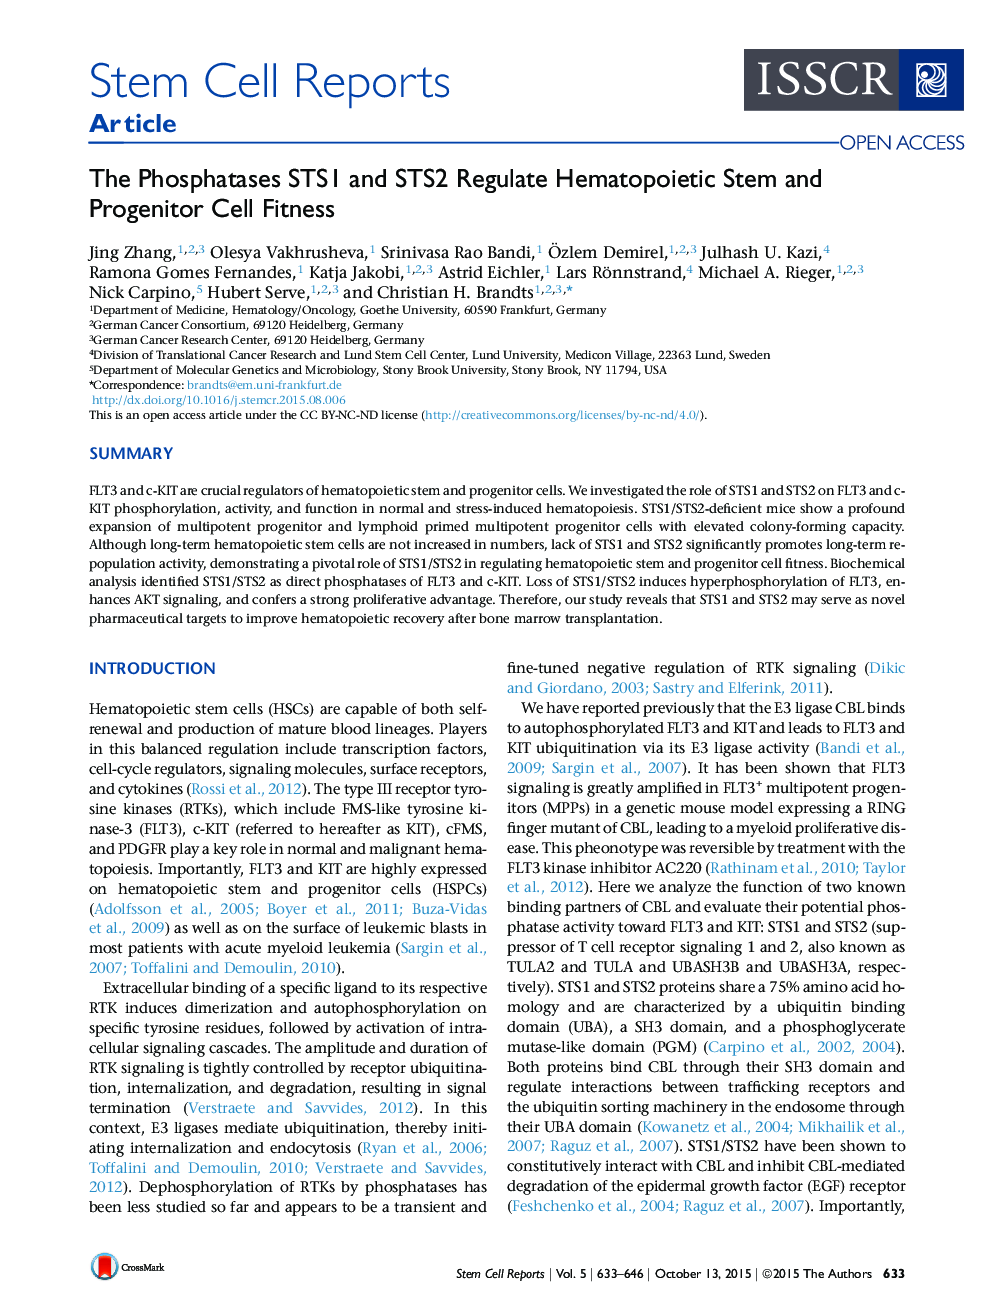 The Phosphatases STS1 and STS2 Regulate Hematopoietic Stem and Progenitor Cell Fitness 